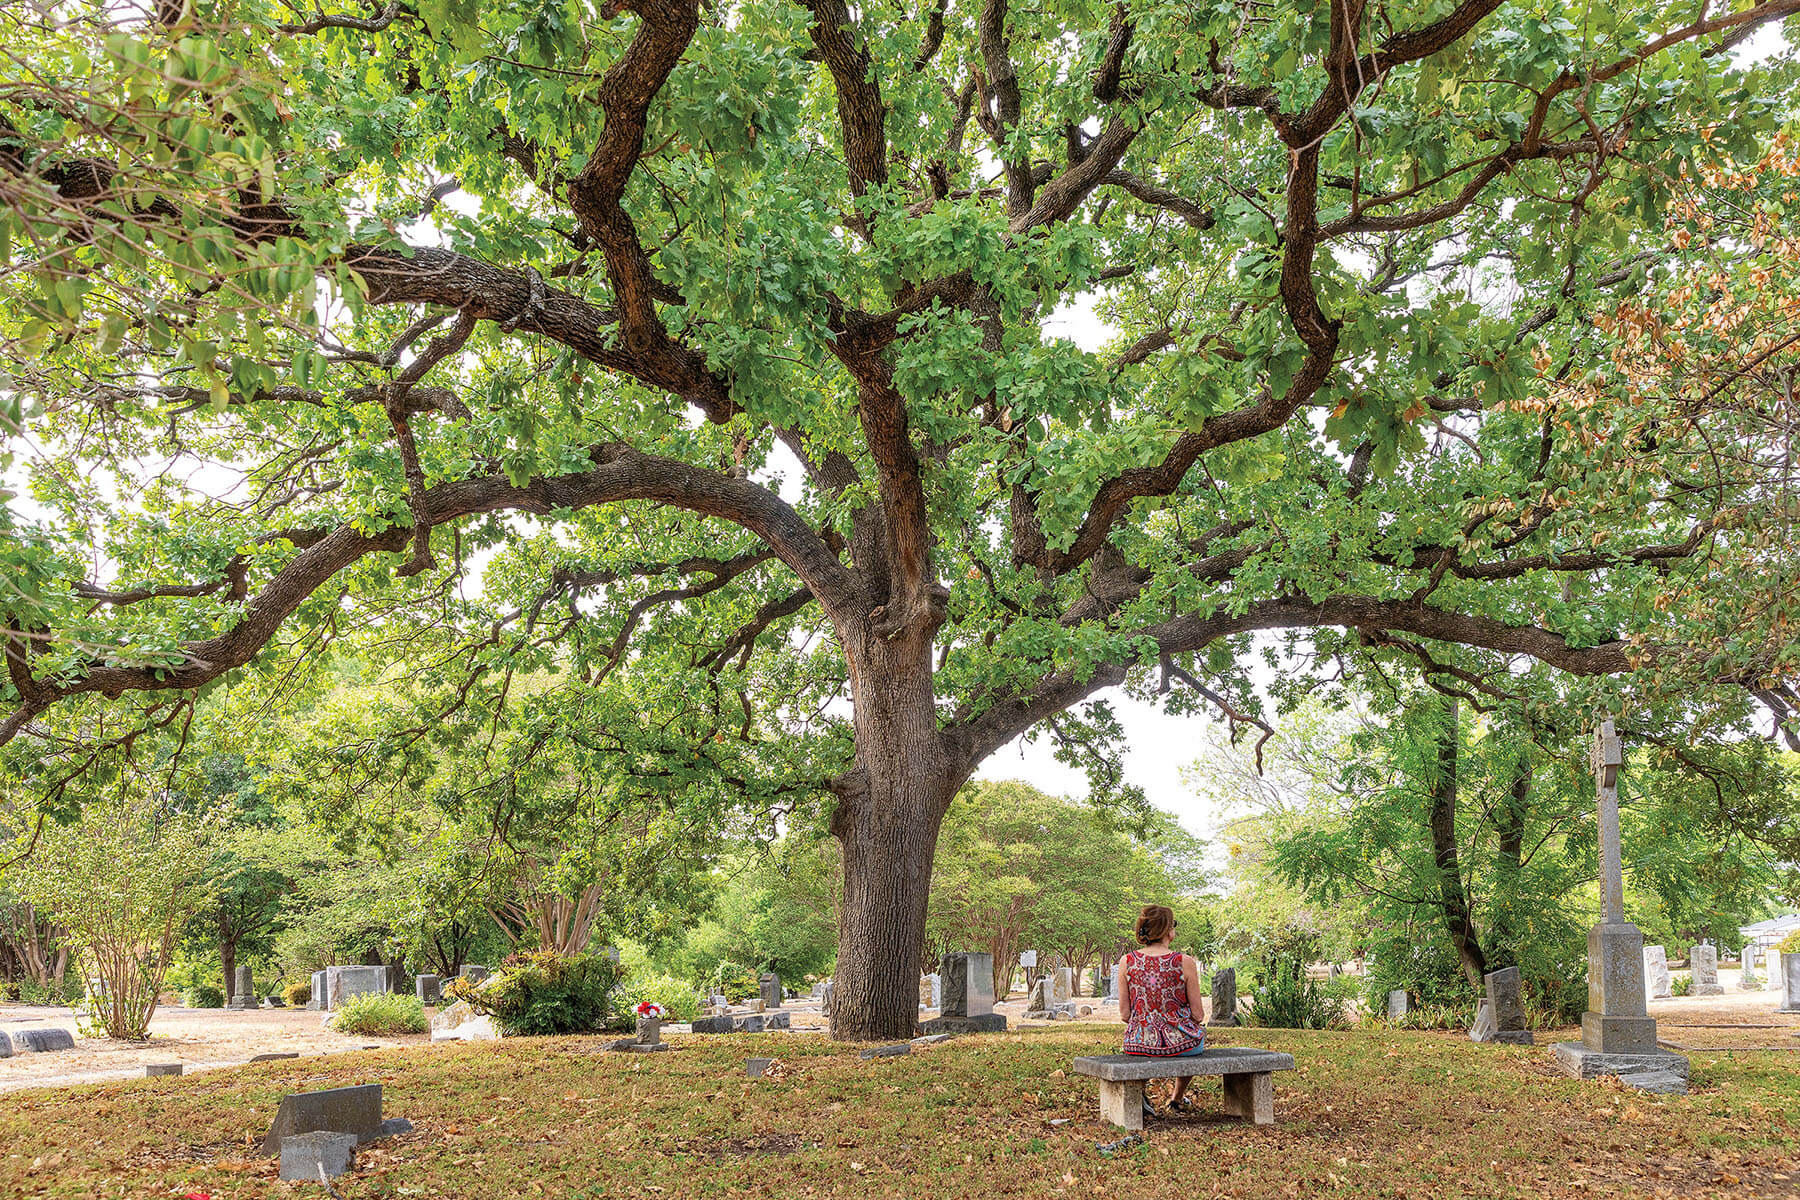 A person sits on a bench beneath a large Live Oak tree in a cemetery